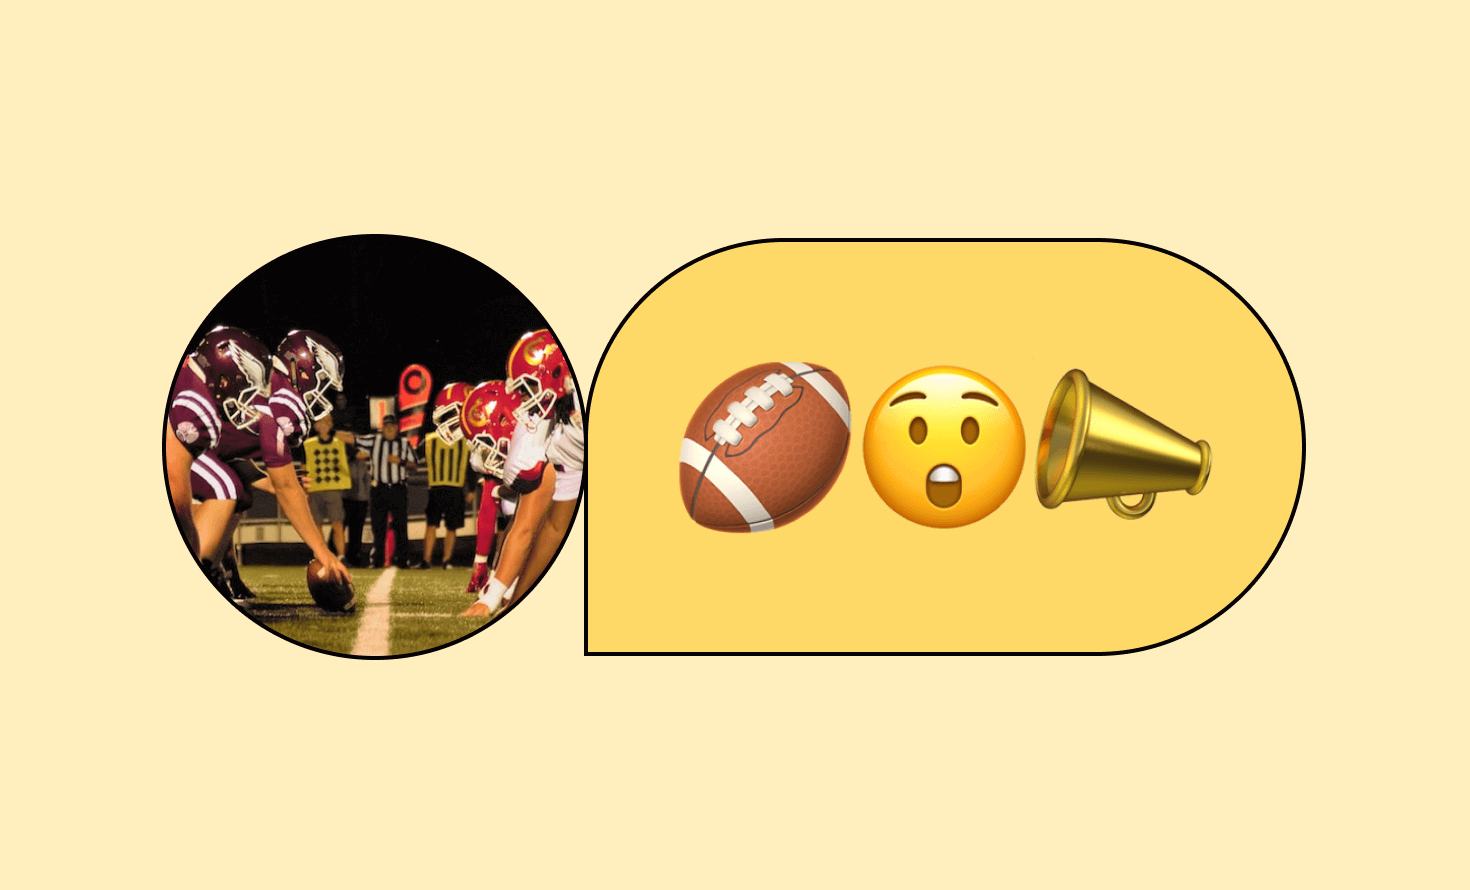 Visual of football players and emojis showing a football and megaphone.